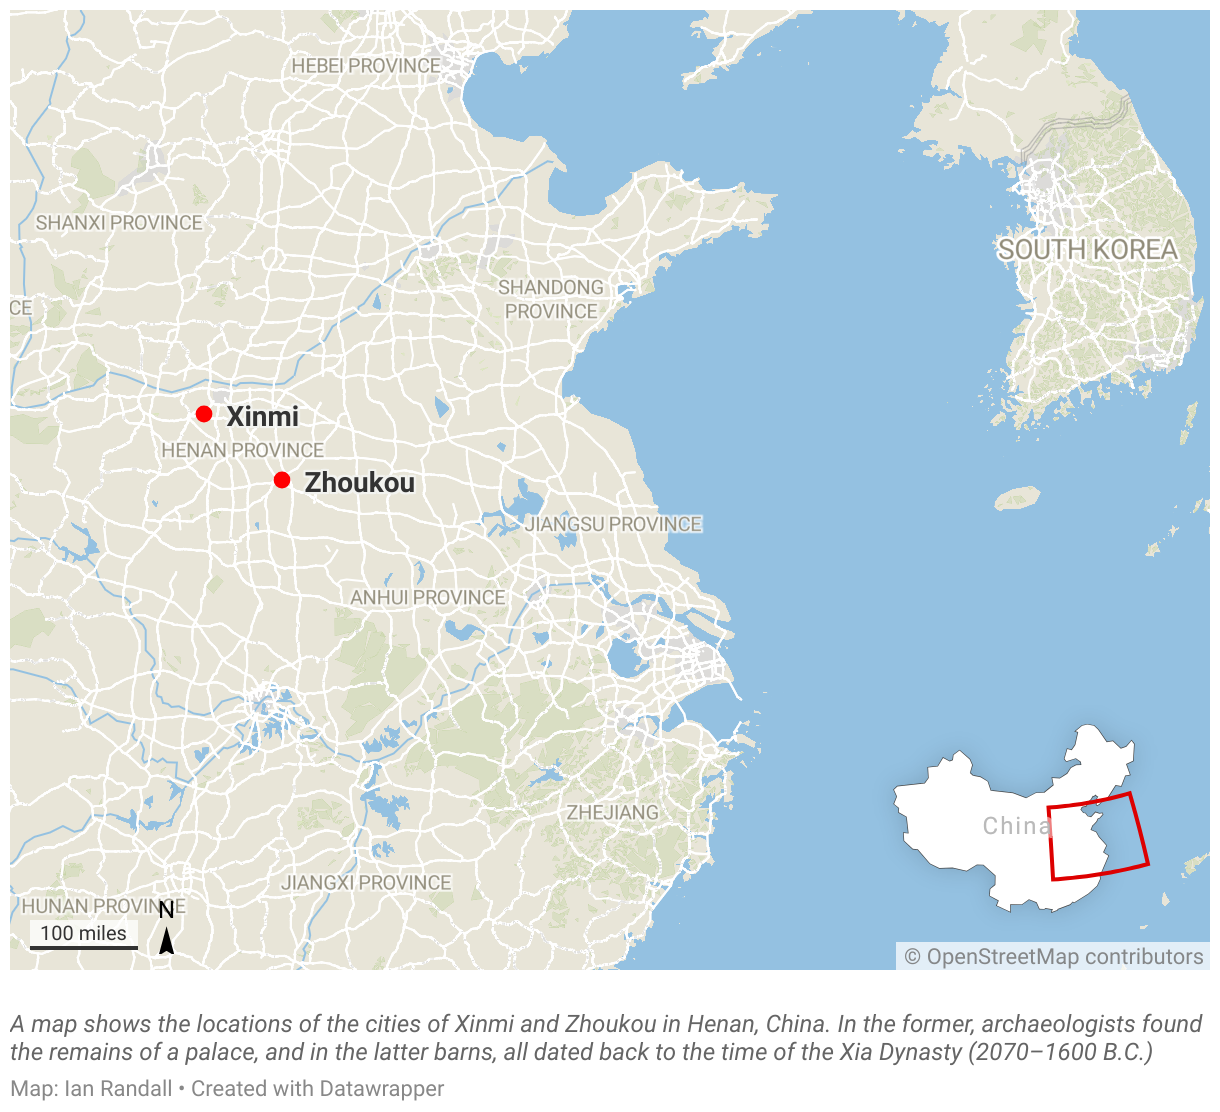 A map shows the locations of the cities of Xinmi and Zhoukou in Henan, China.